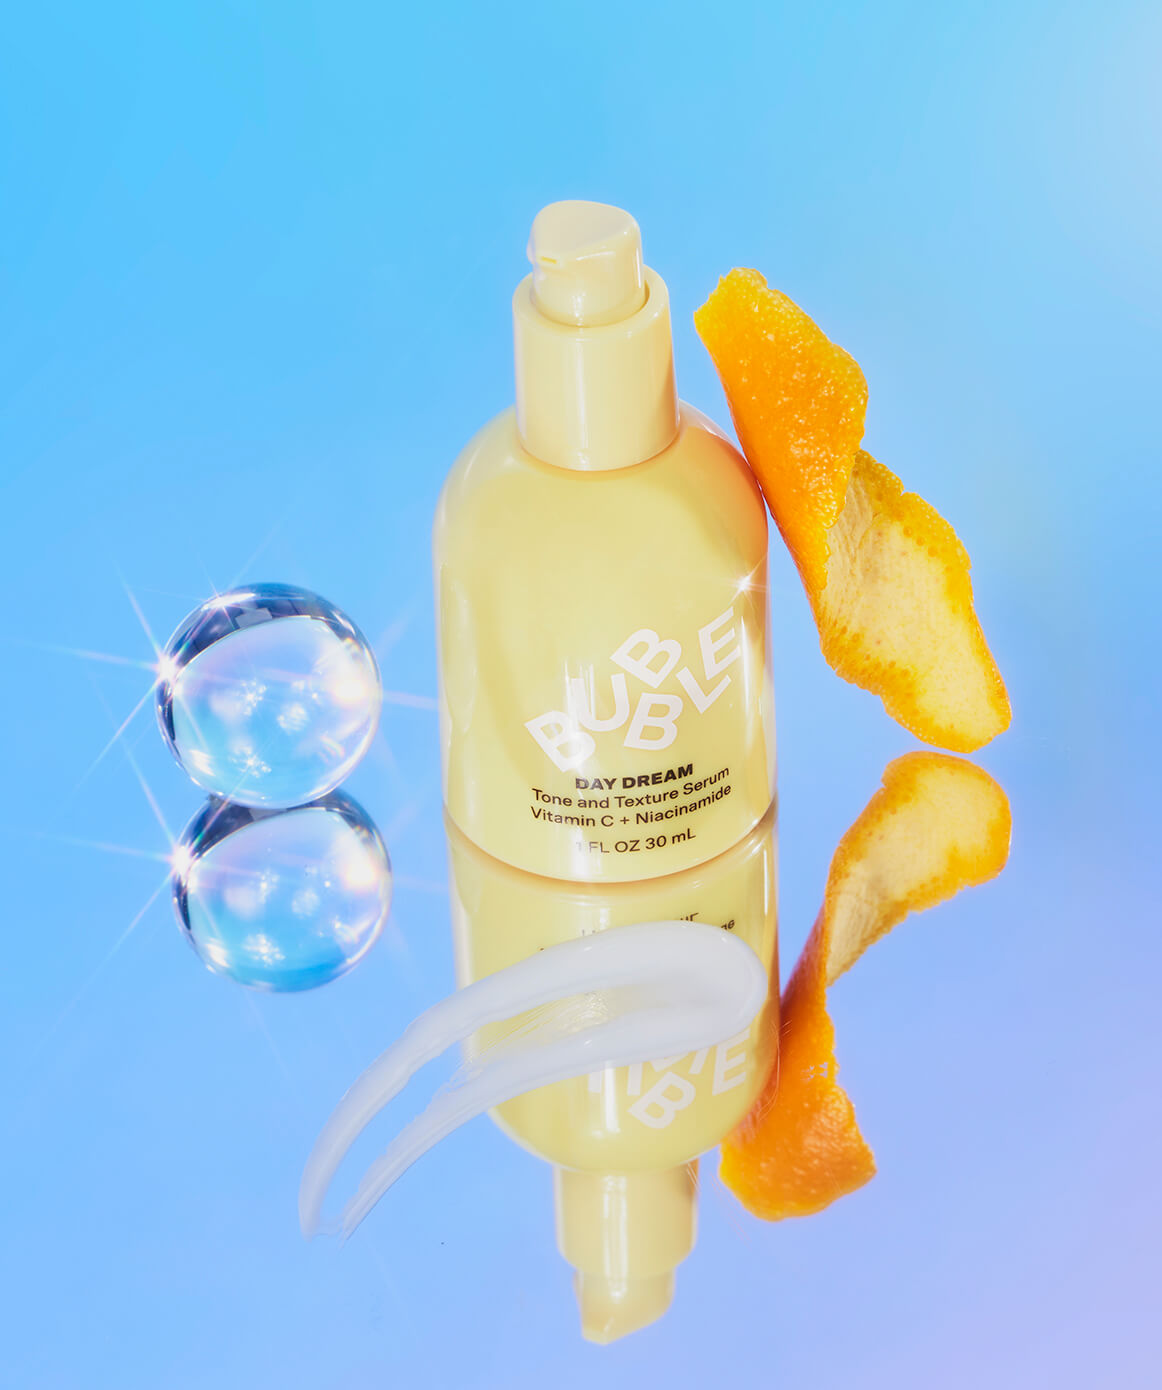 Can you use vitamin c serum with niacinamide together in your skin